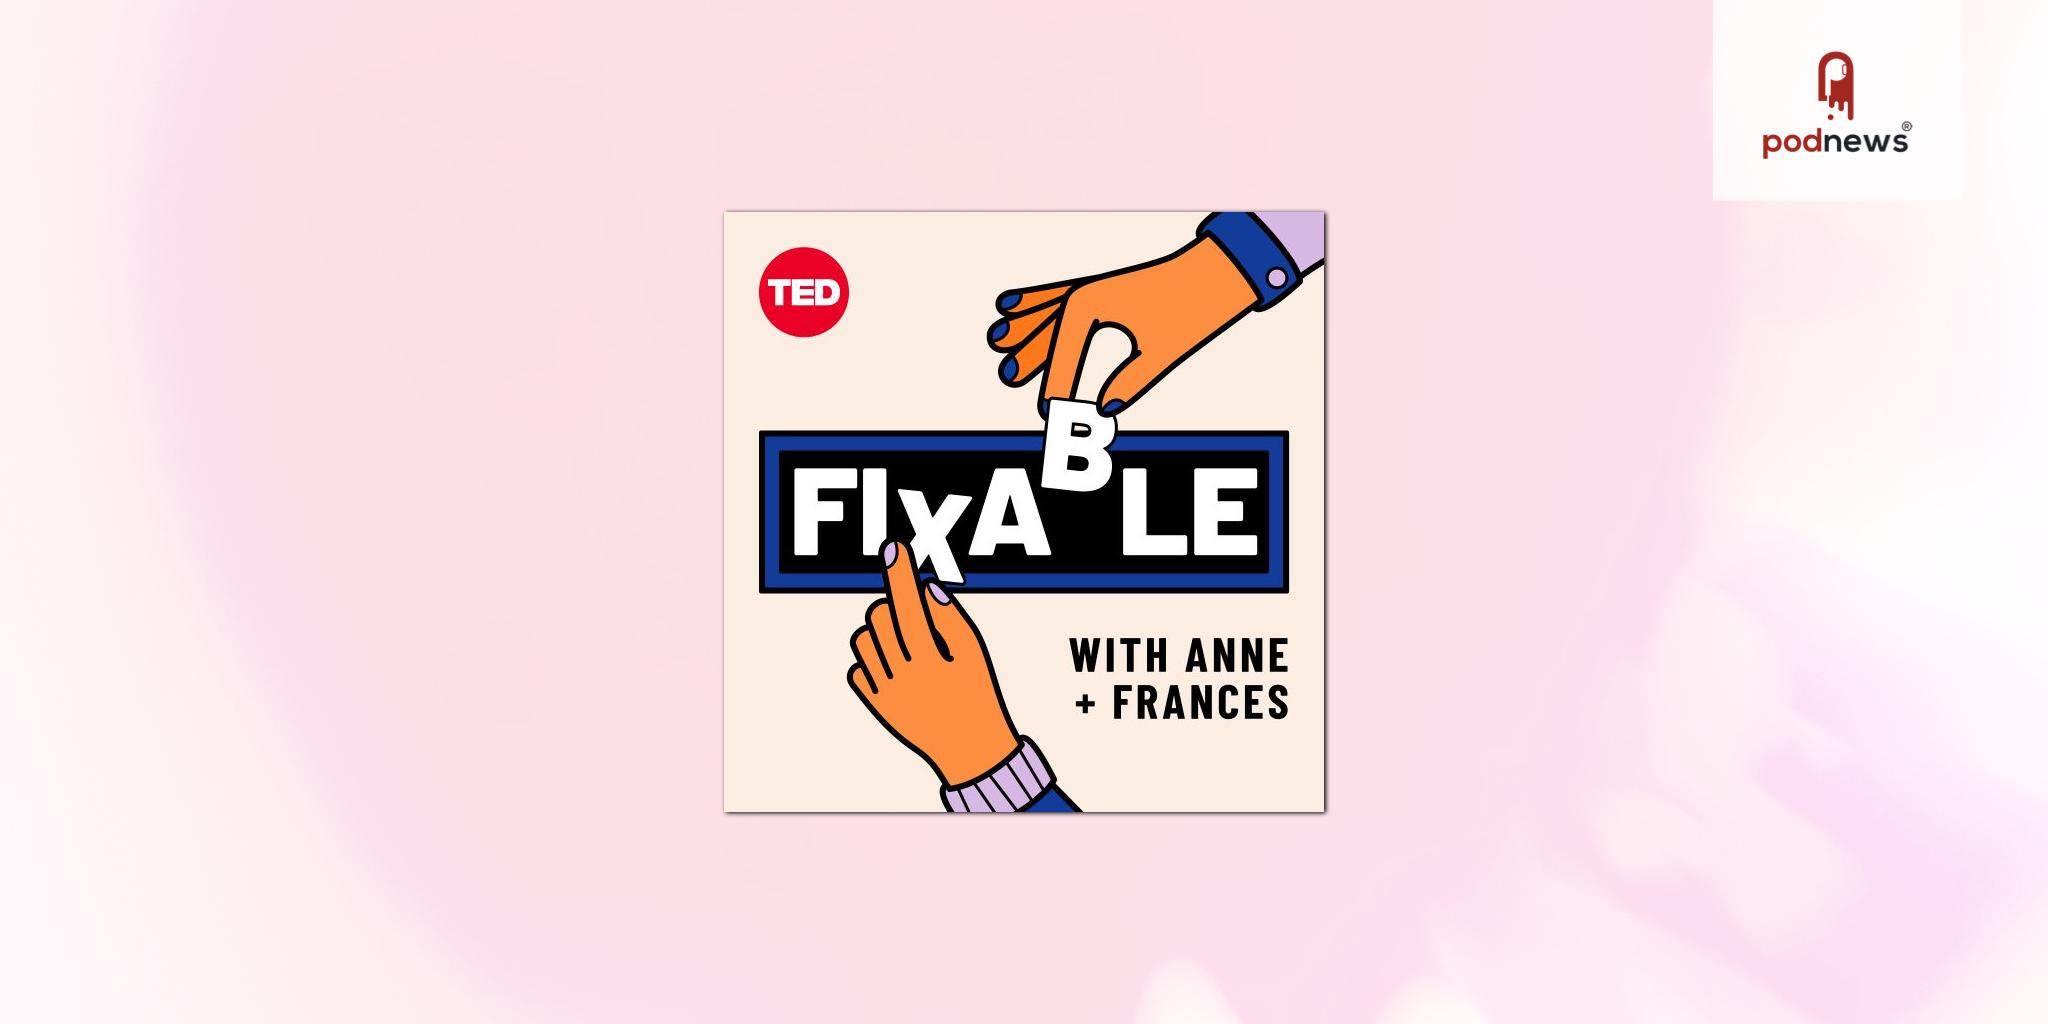 TED Audio Collective announces a new season of the hit podcast Fixable, addressing workplace issues